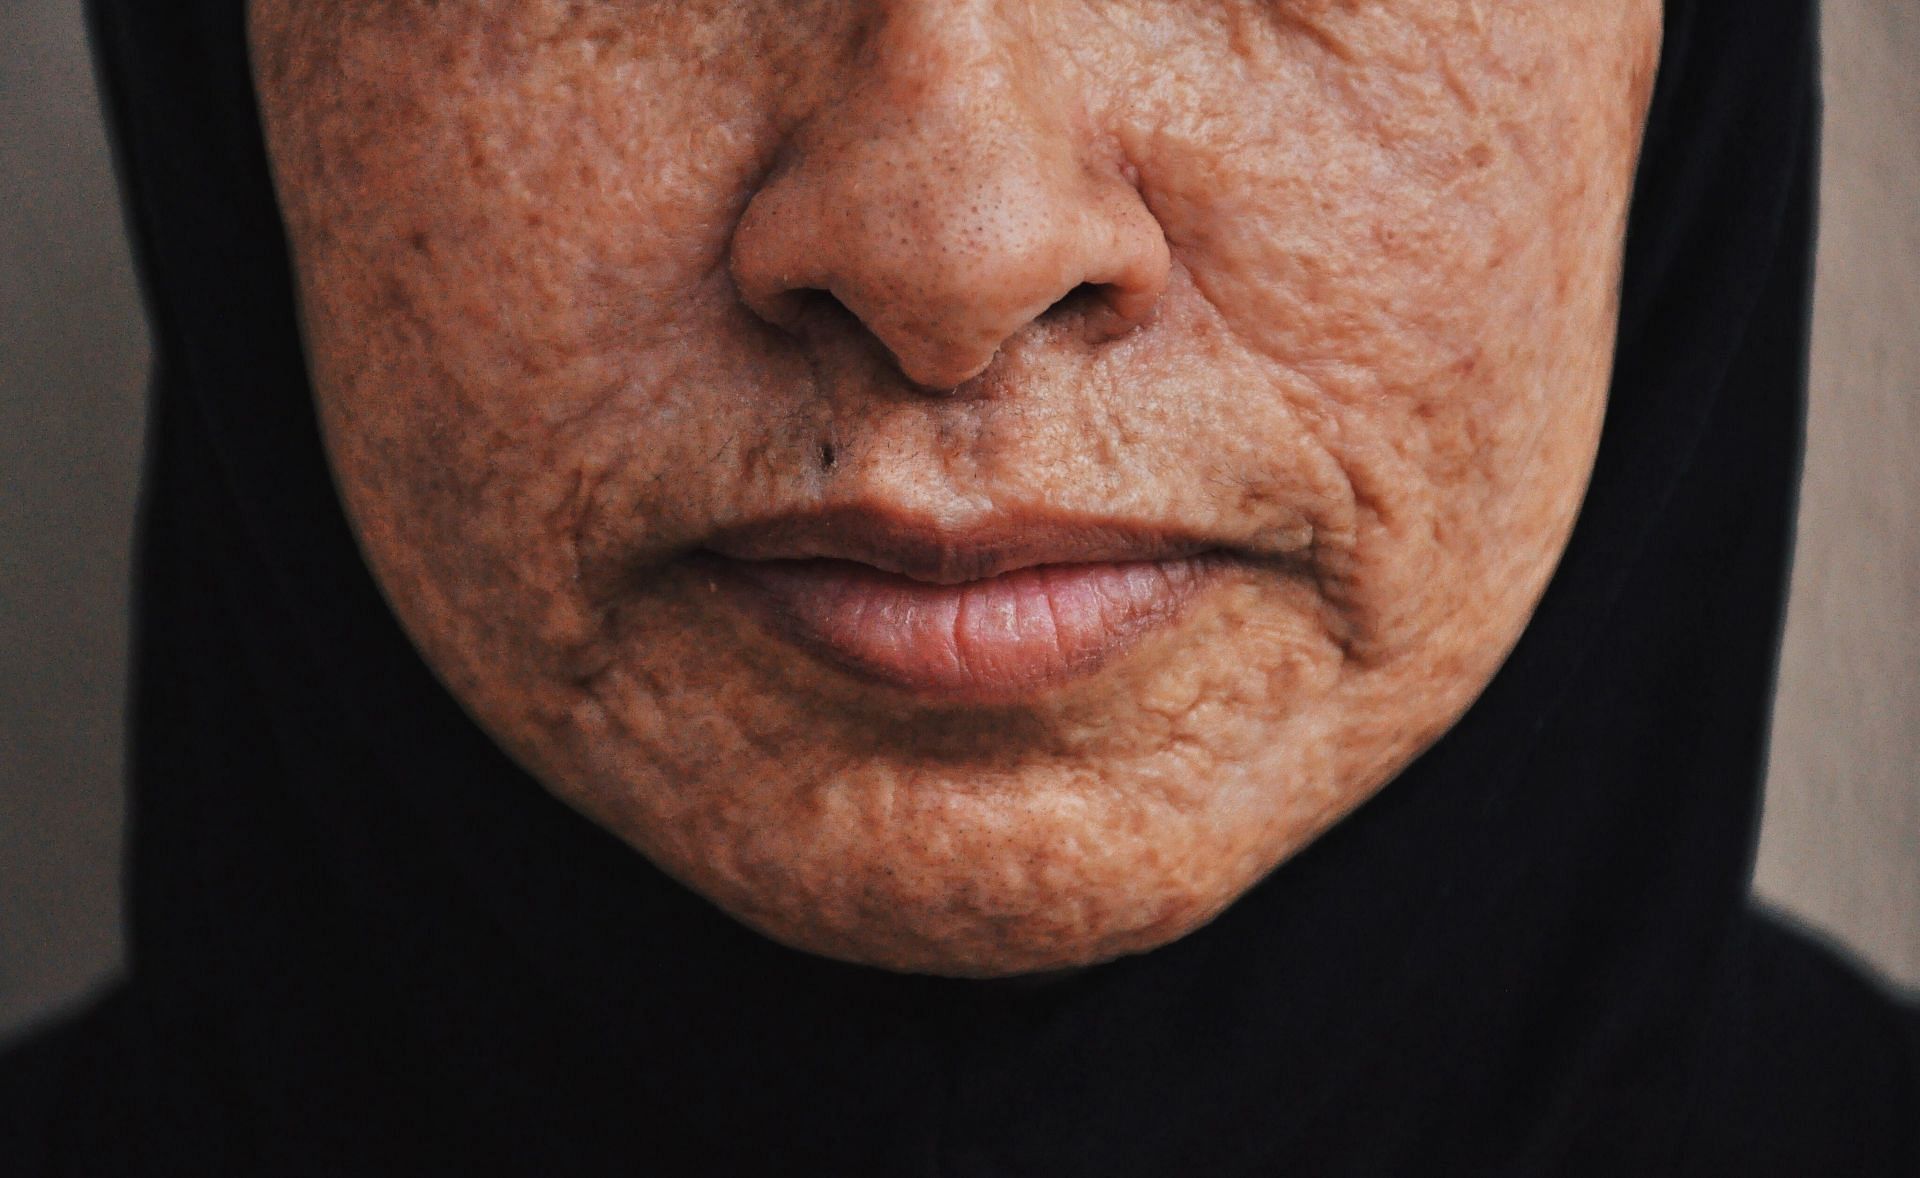 benefits of Vitamin E capsules for scars (image sourced via Pexels / Photo by andy)